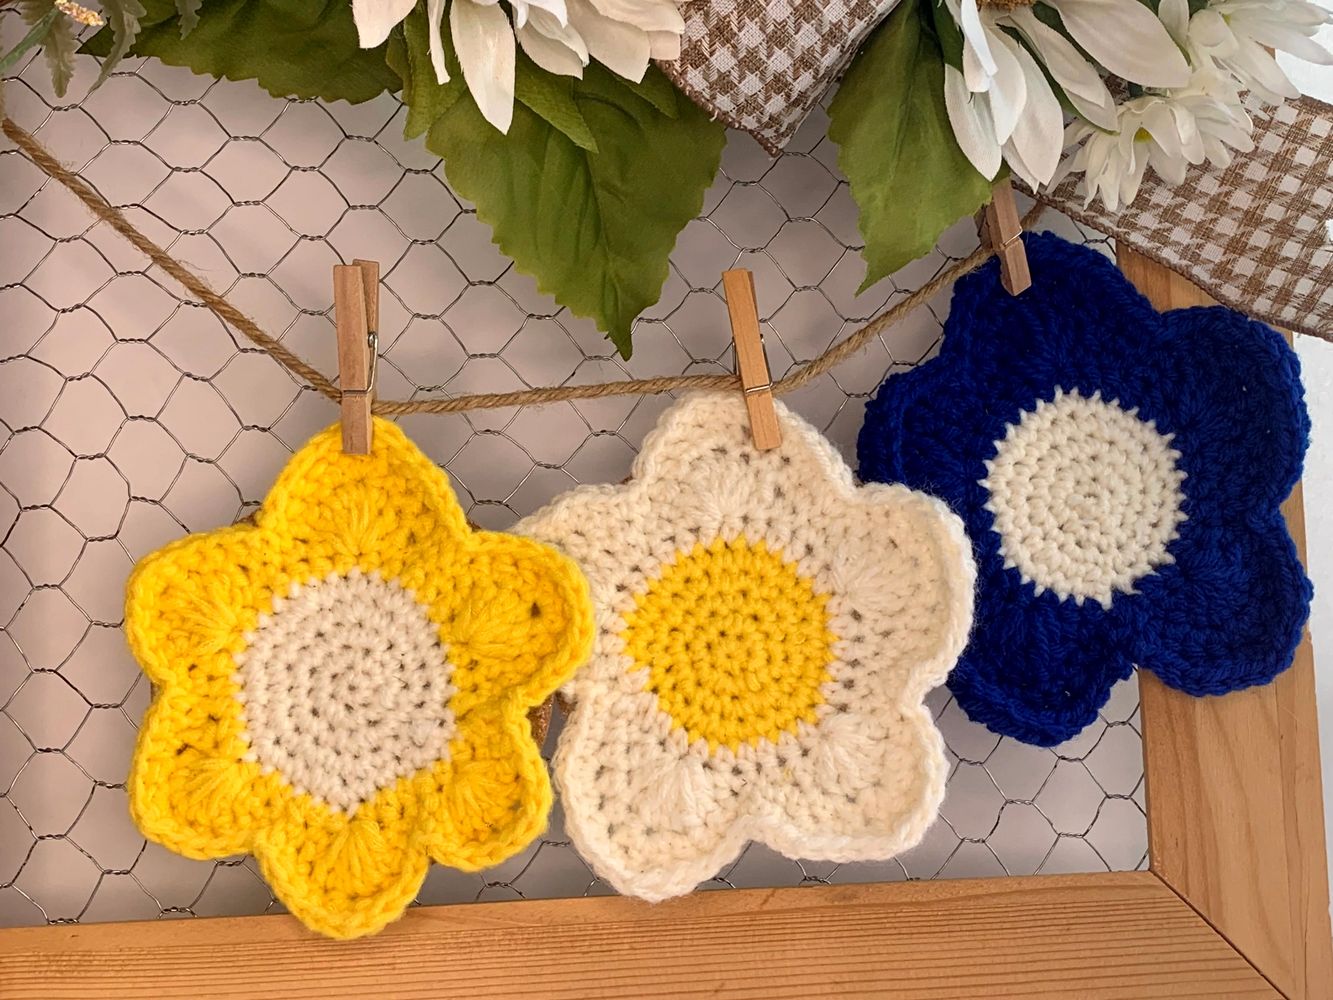 Three yellow, white and blue handcrafted crochet coasters.